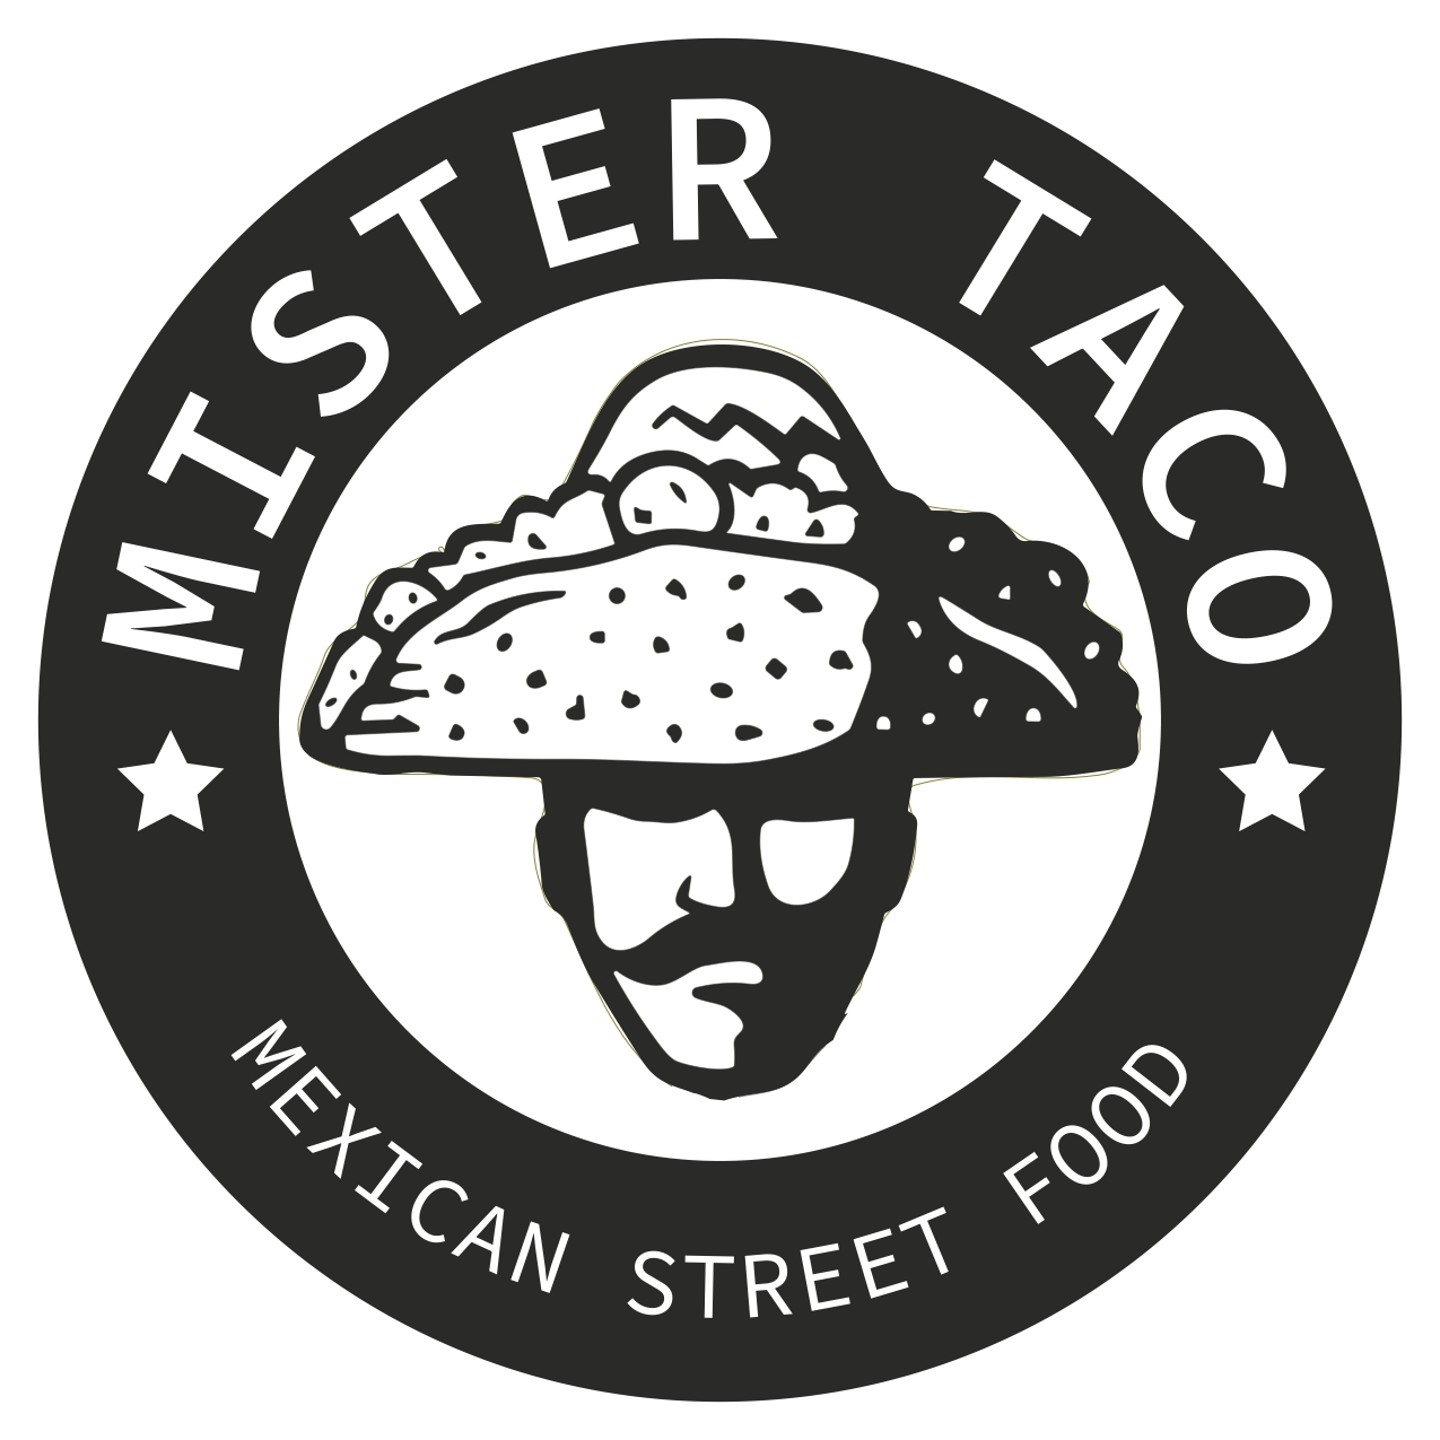 Welcome To Mister Taco Mexican Street Food!